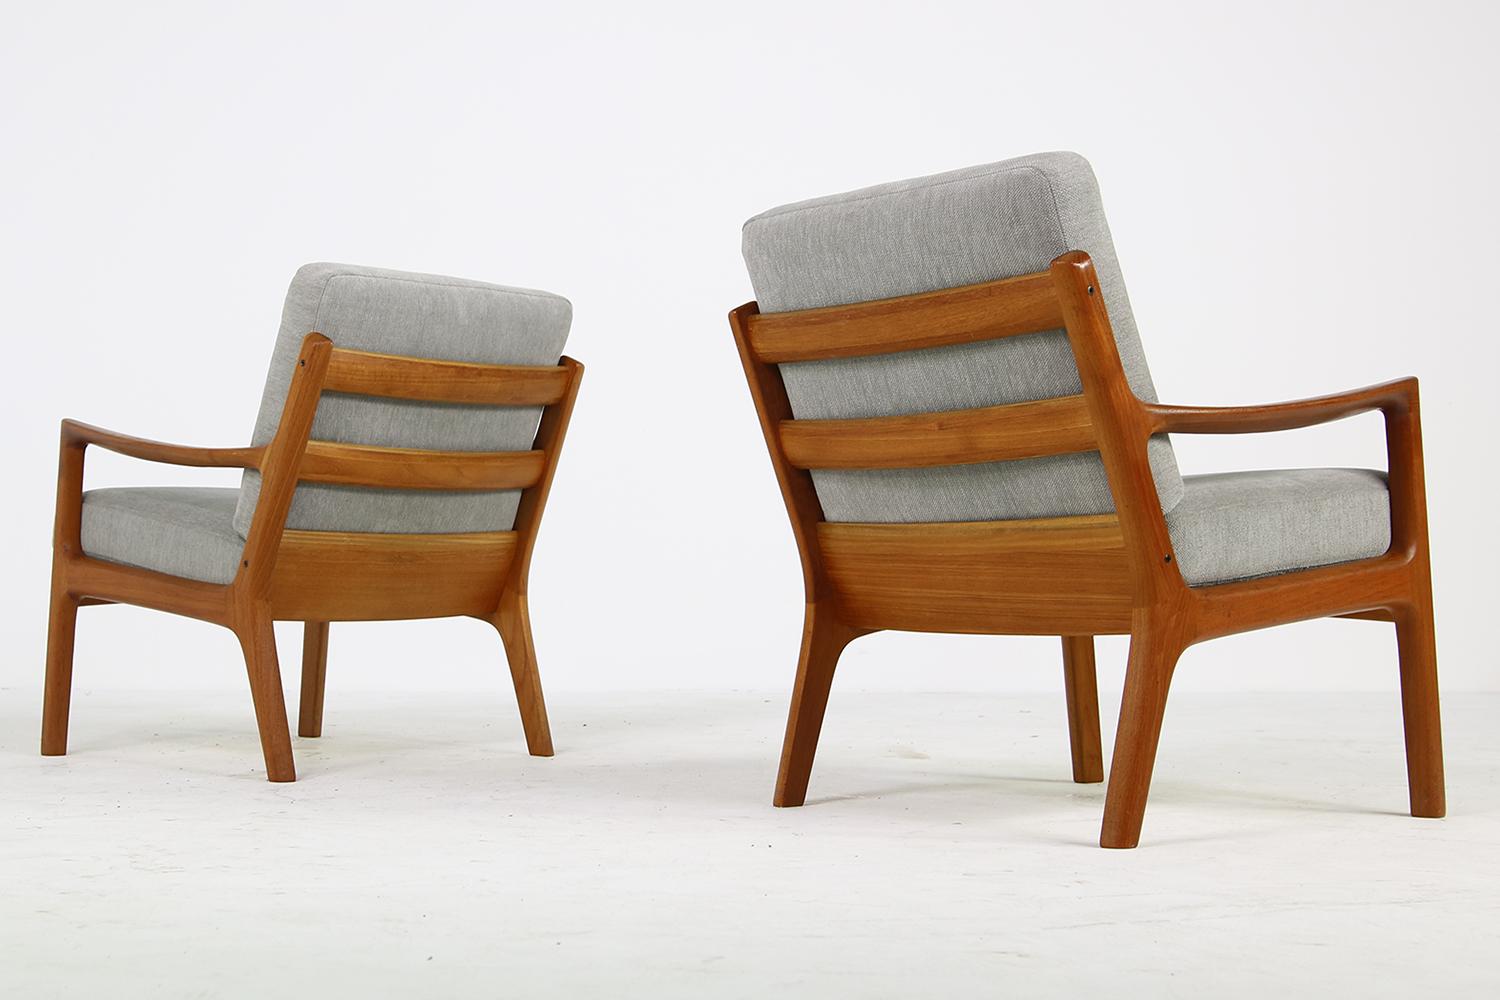 Beautiful pair of 1960s Danish modern Ole Wanscher easy chairs, senator series in Teak. New upholstery in high quality woven fabric, in grey. Overall a fantastic condition. Made by France & Son, Denmark.